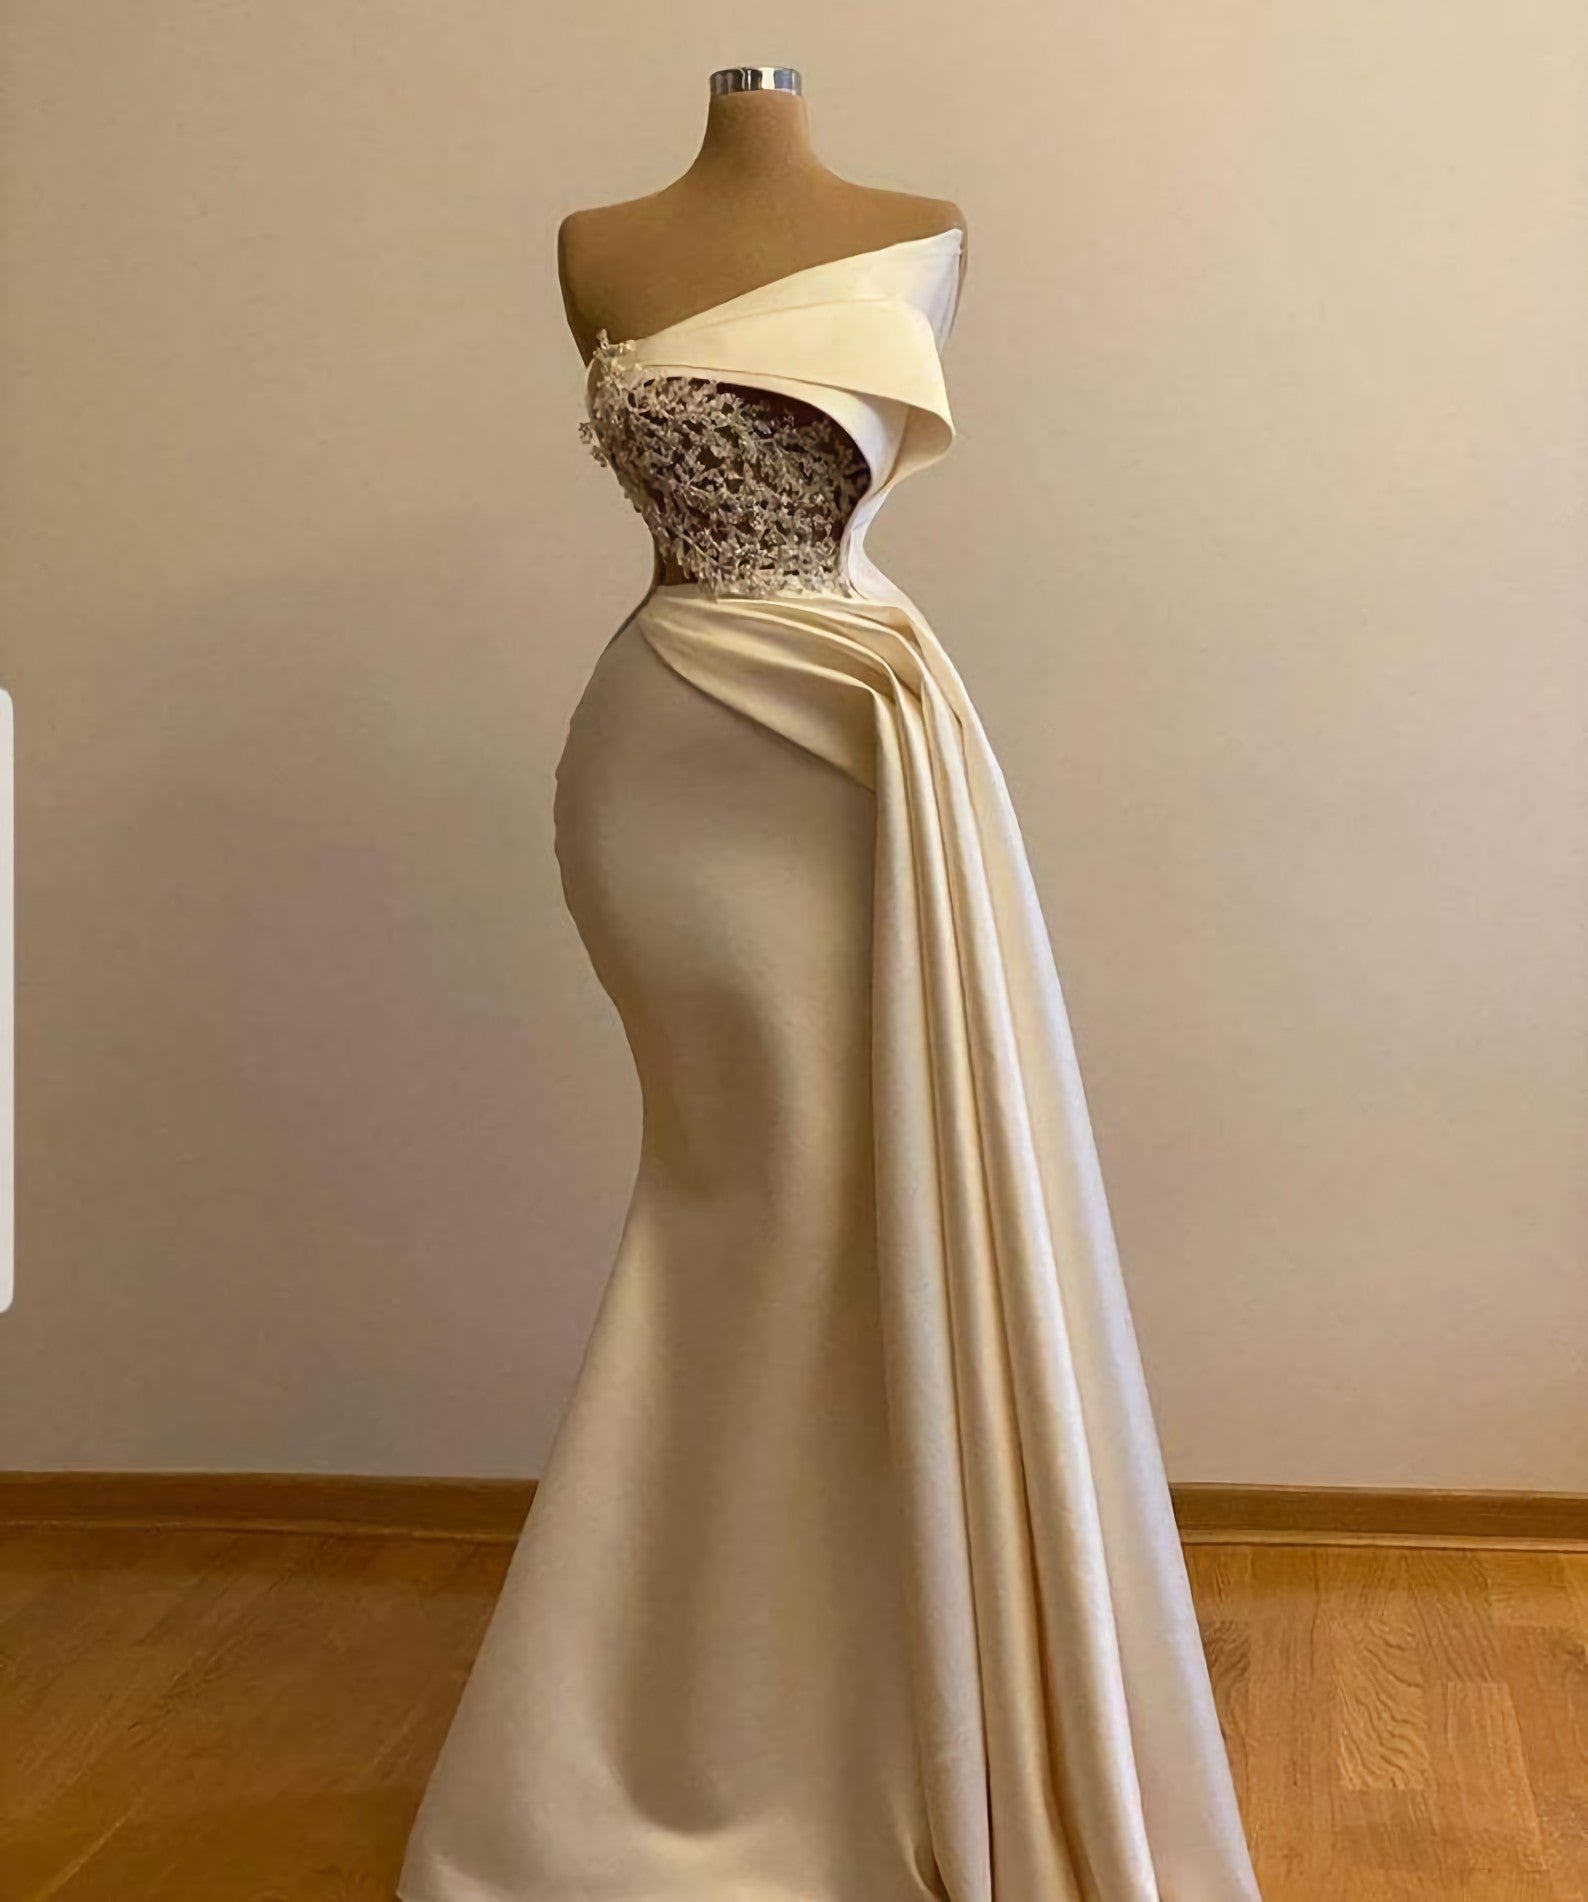 Off Shoulder Ivory Prom Dress With Cape Wedding Gown Bridal Dress, Long Ivory Engagement Dress, African Clothing For Women Porm Dress